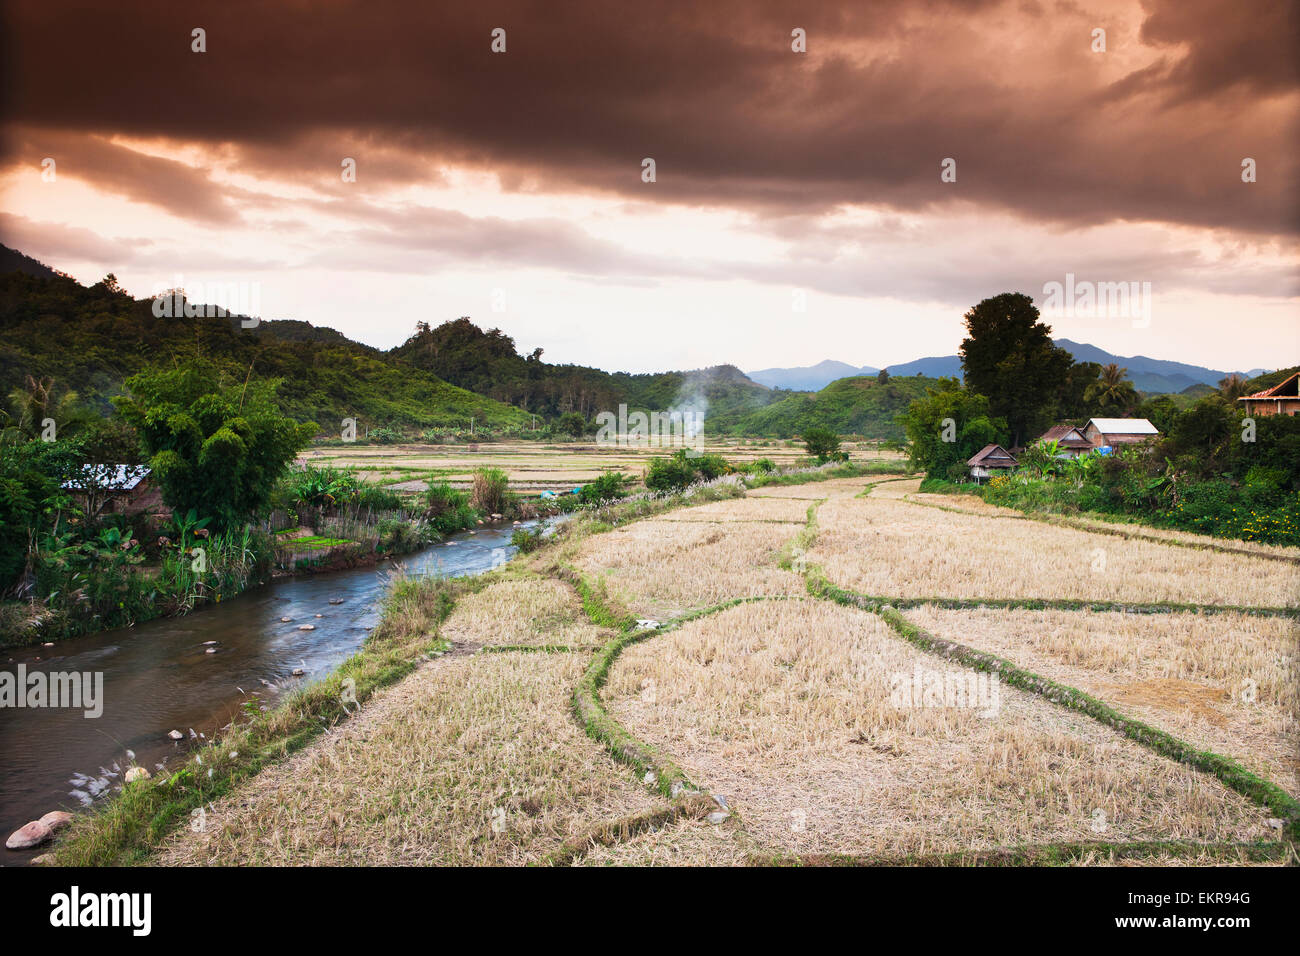 Landscape and storm clouds over a remote Northern Laos village; Vieng Thong; Laos Stock Photo